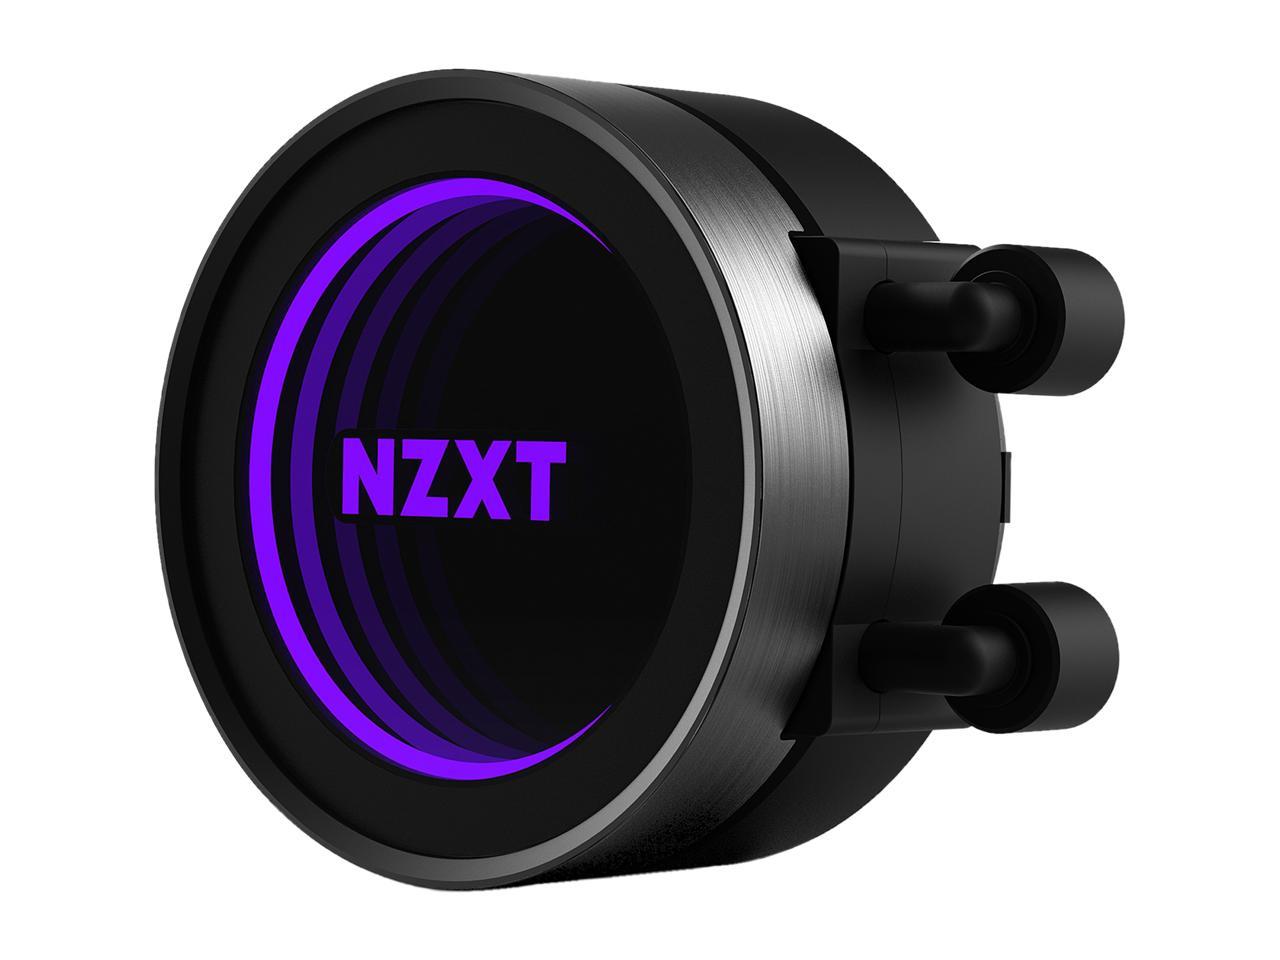 Nzxt Kraken X72 360mm All In One Rgb Cpu Liquid Cooler Cam Powered Infinity Mirror Design Performance Engineered Pump Reinforced Extended Tubing Aer P120mm Radiator Fan 3 Included Newegg Com